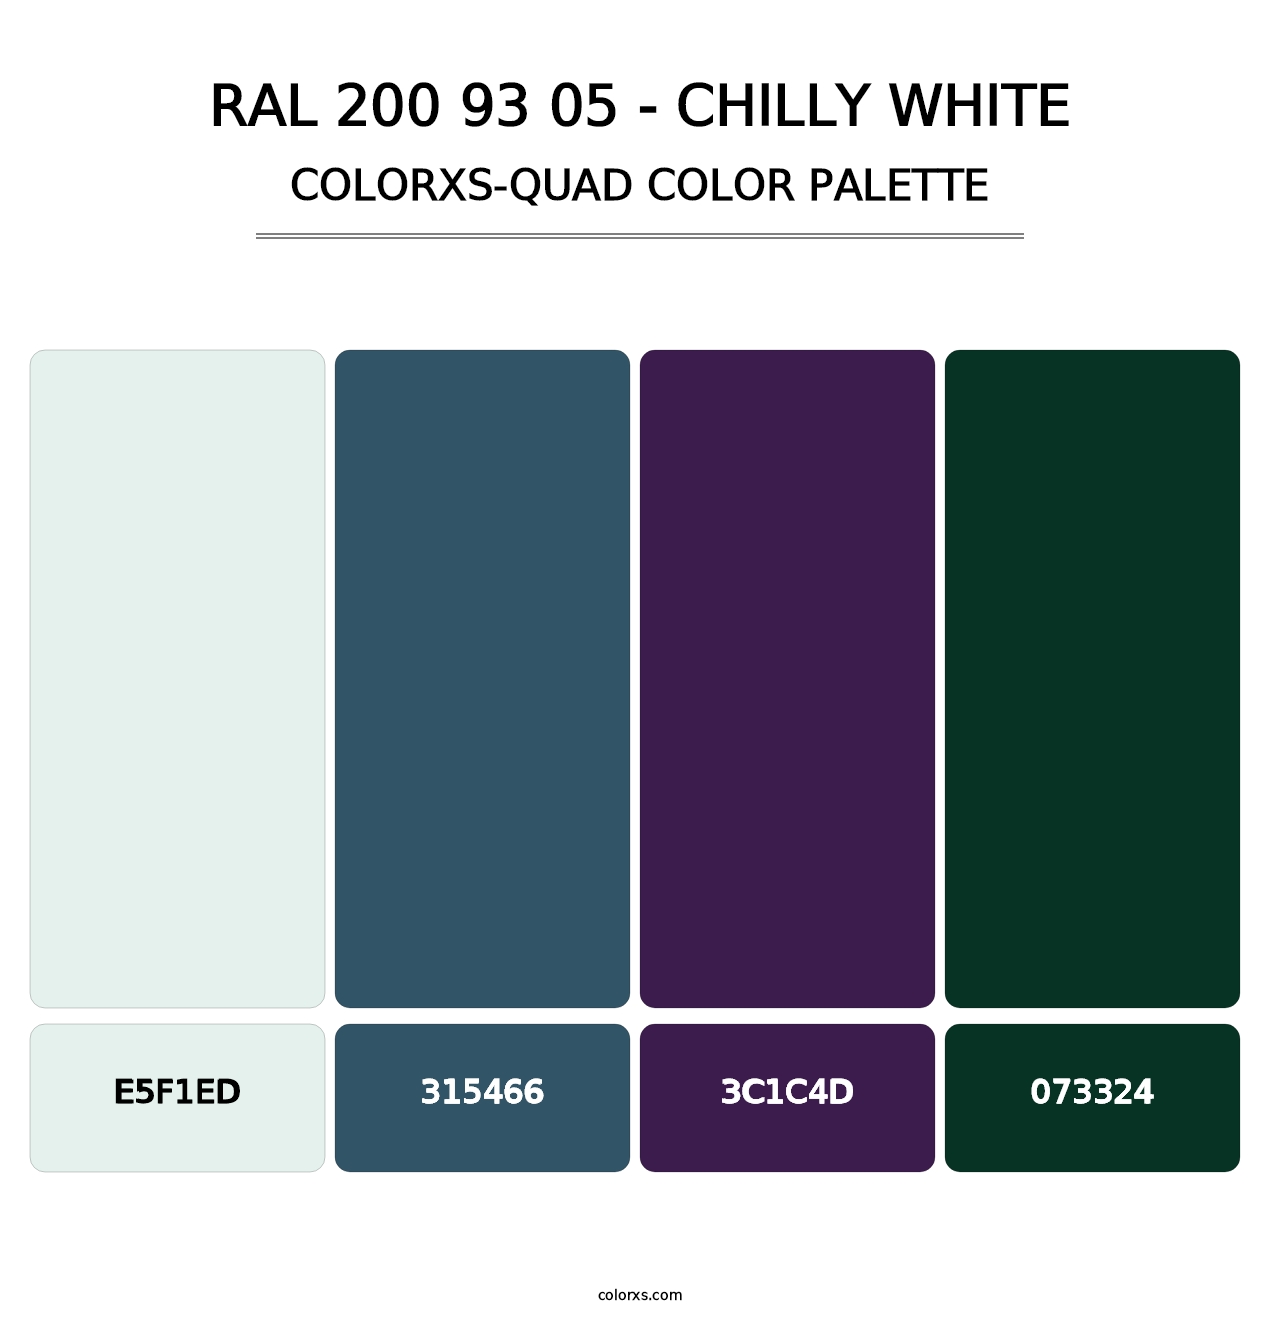 RAL 200 93 05 - Chilly White - Colorxs Quad Palette